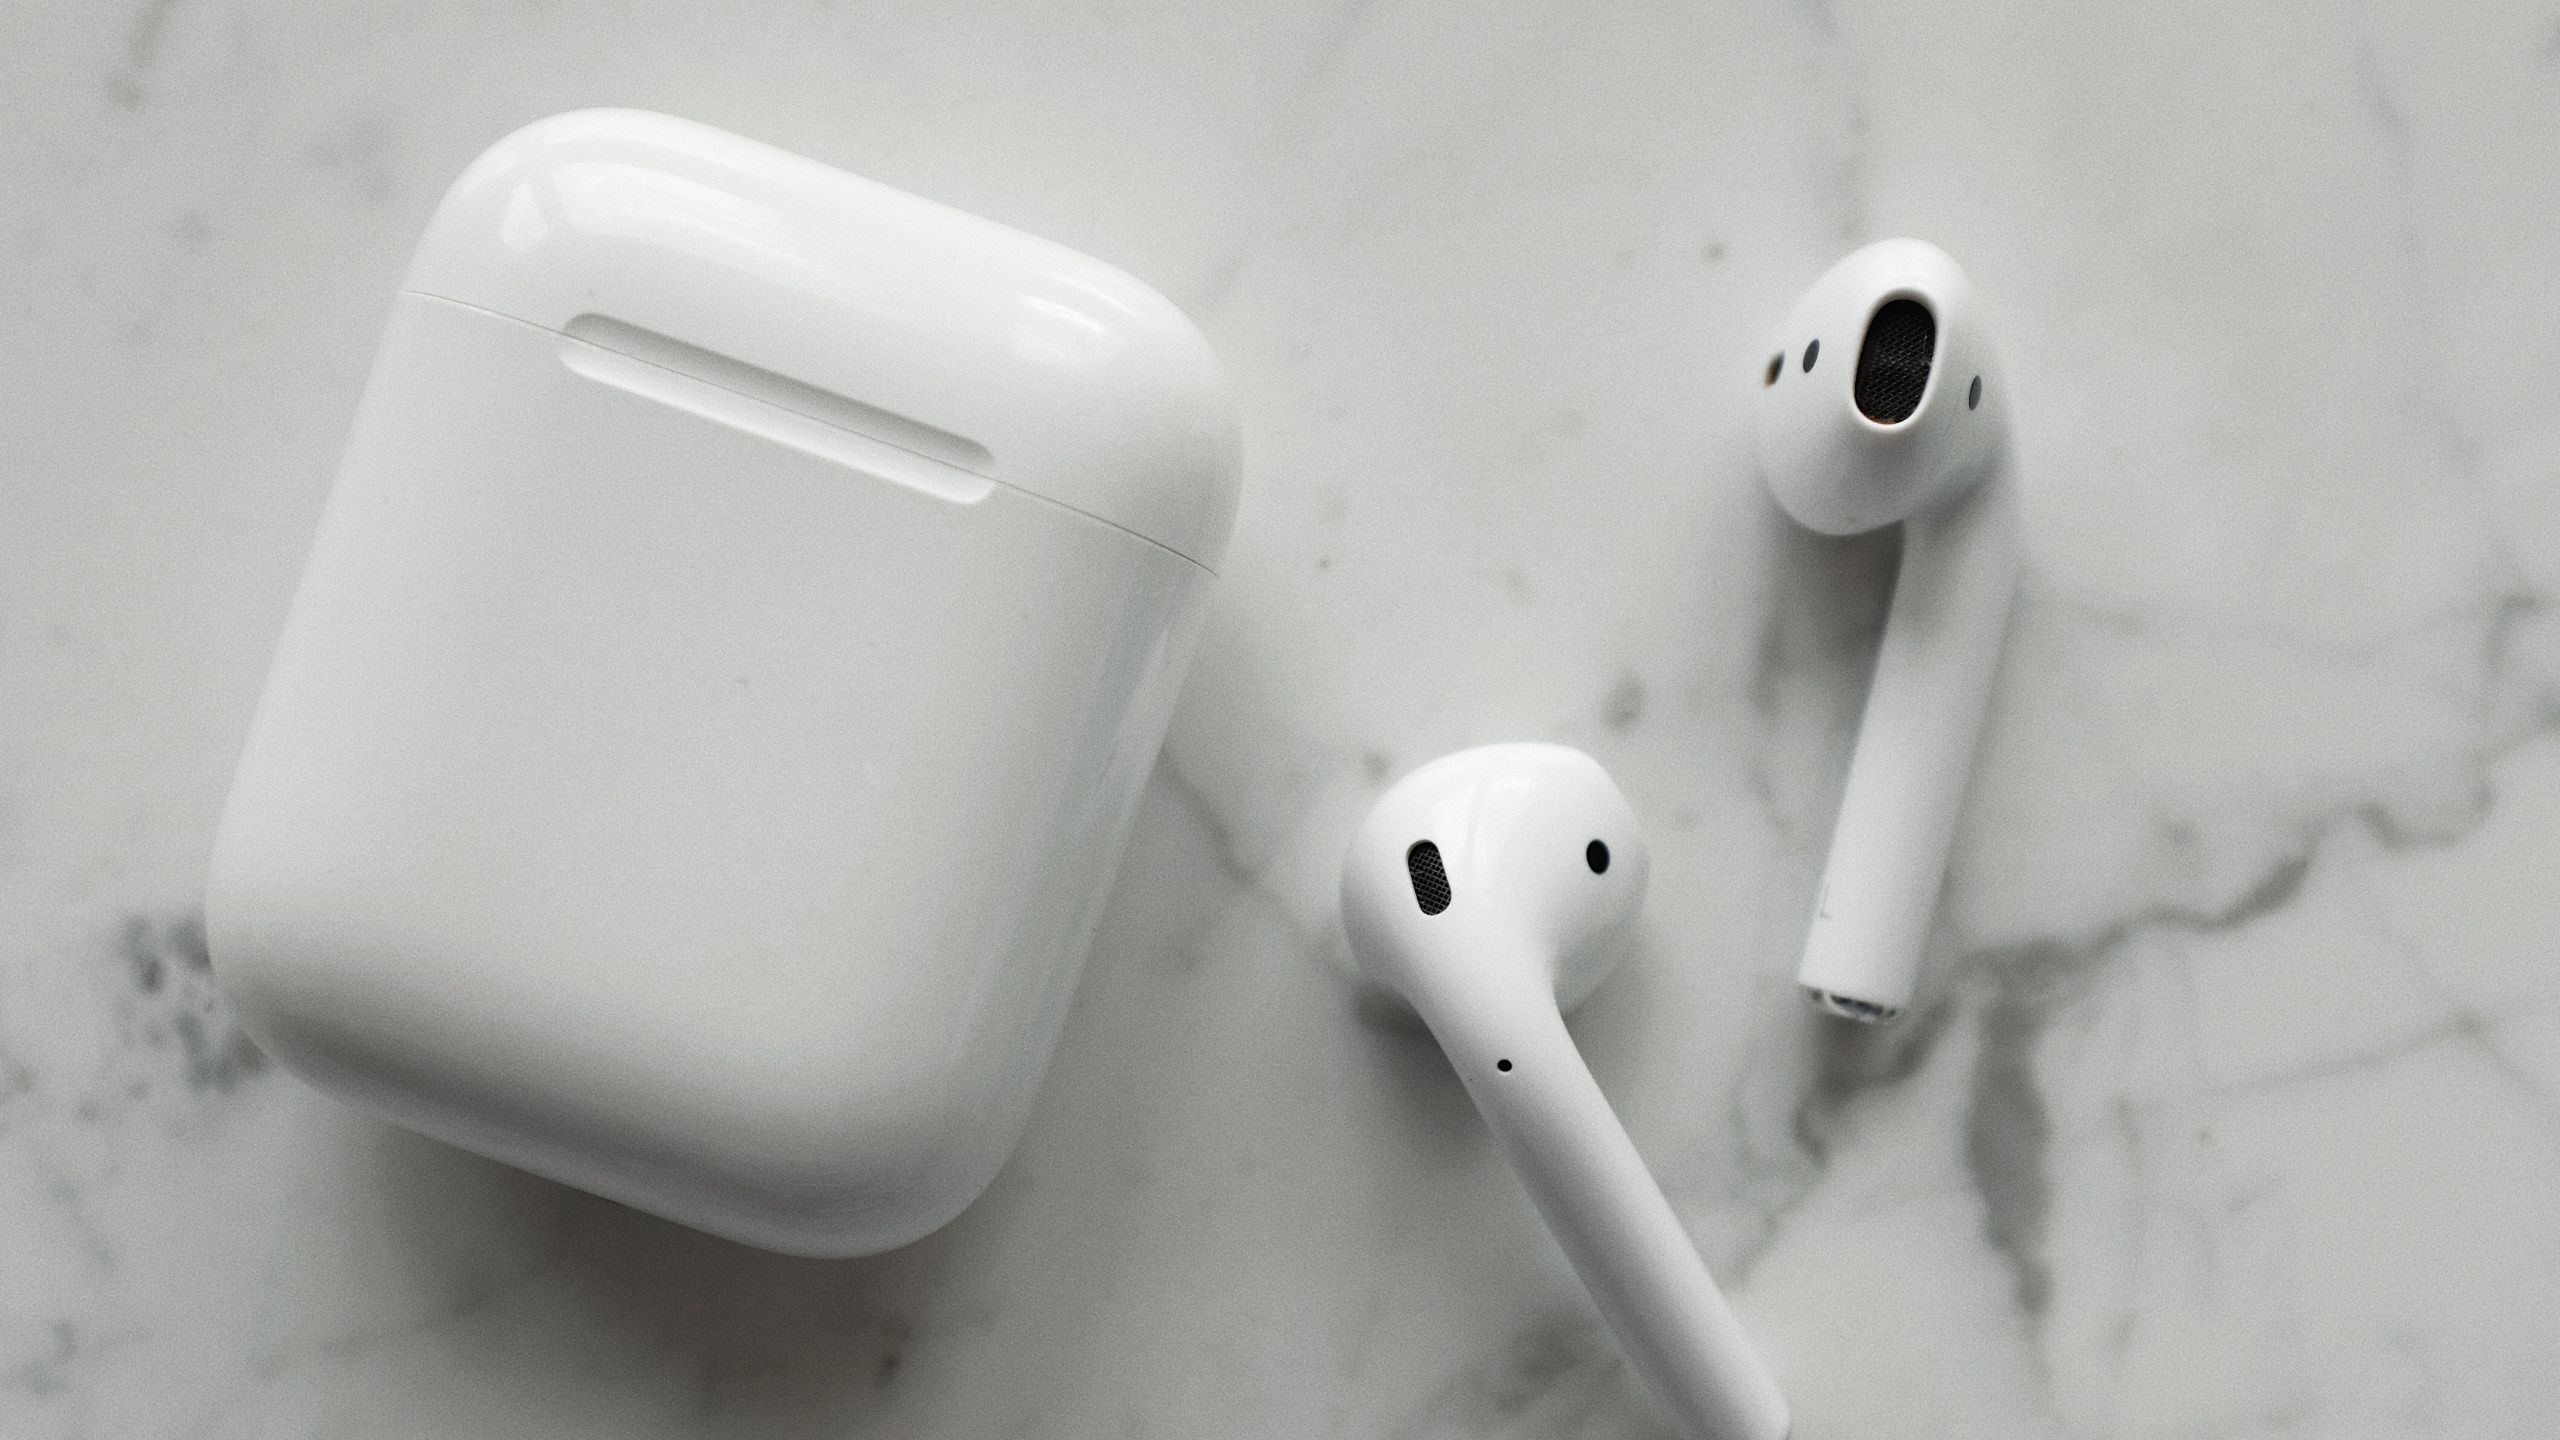 How to reset AirPods Pro from previous owner